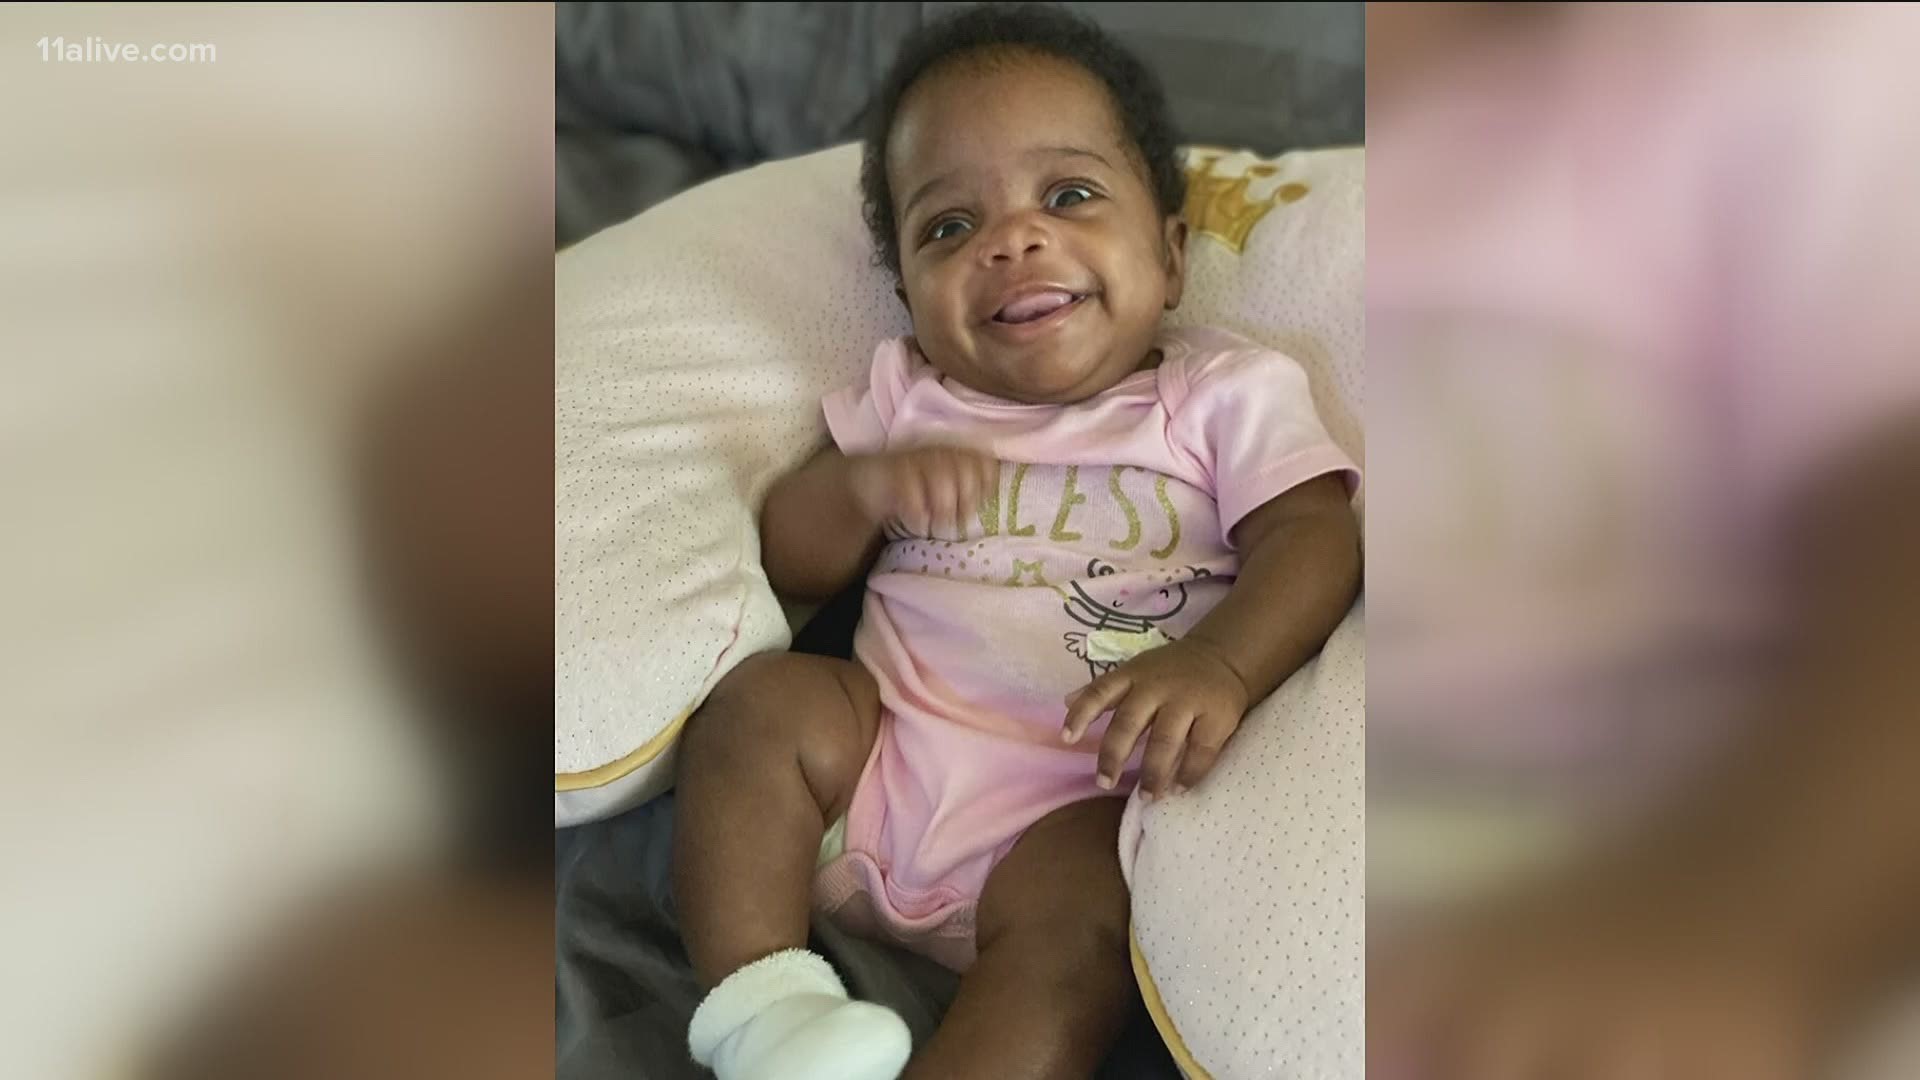 Taylor Jones' family doesn't want to be away from her for even for a minute, but COVID-19 forced the newborn and her family to be apart for nearly three weeks.